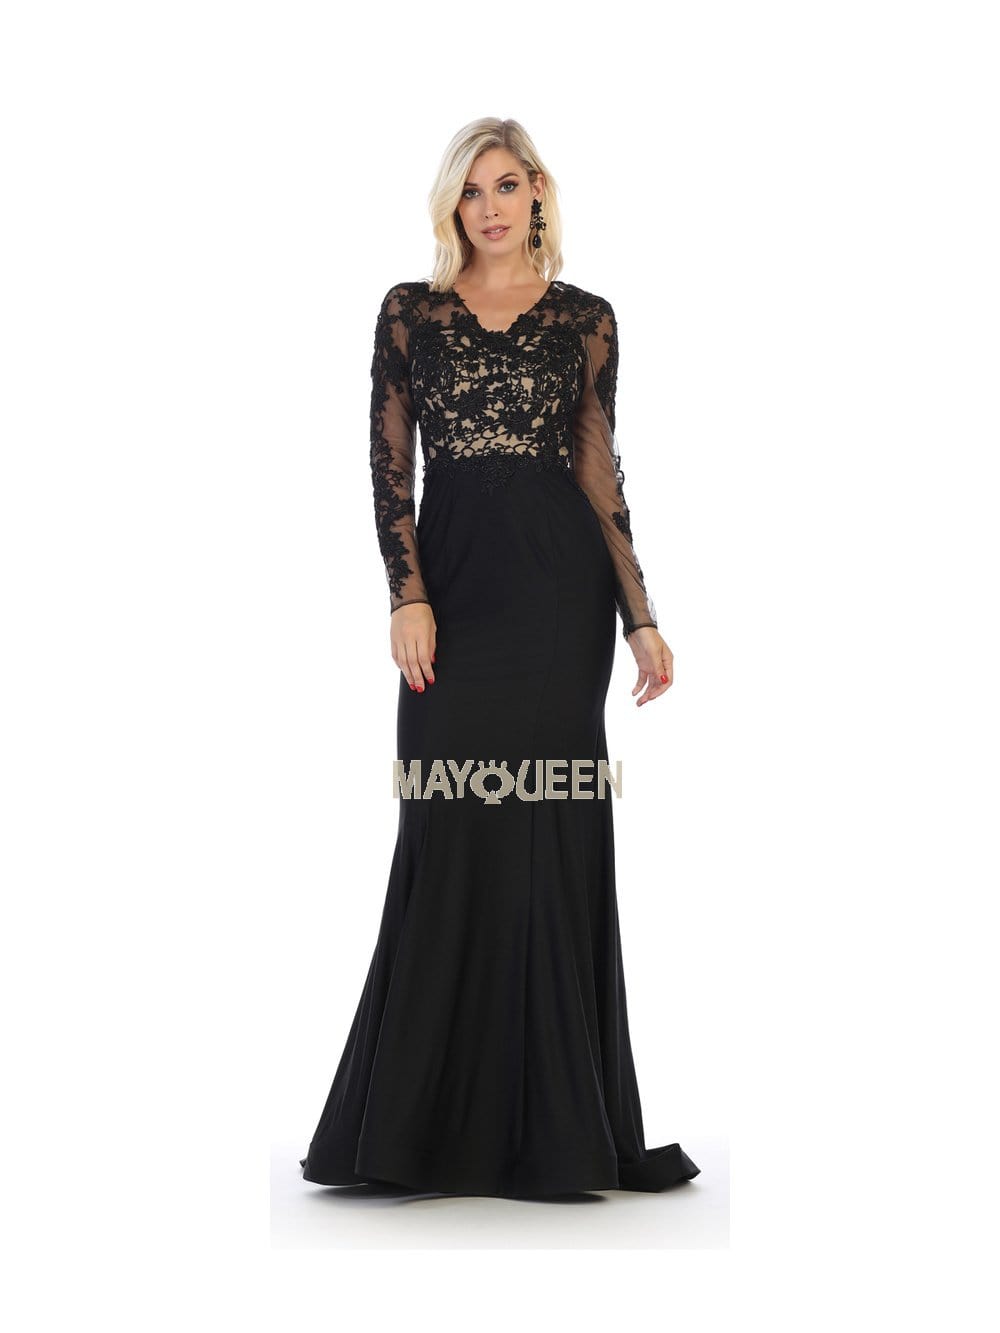 May Queen - RQ7661 Illusion Long Sleeve Appliqued Mermaid Gown Mother of the Bride Dresses 4 / Black